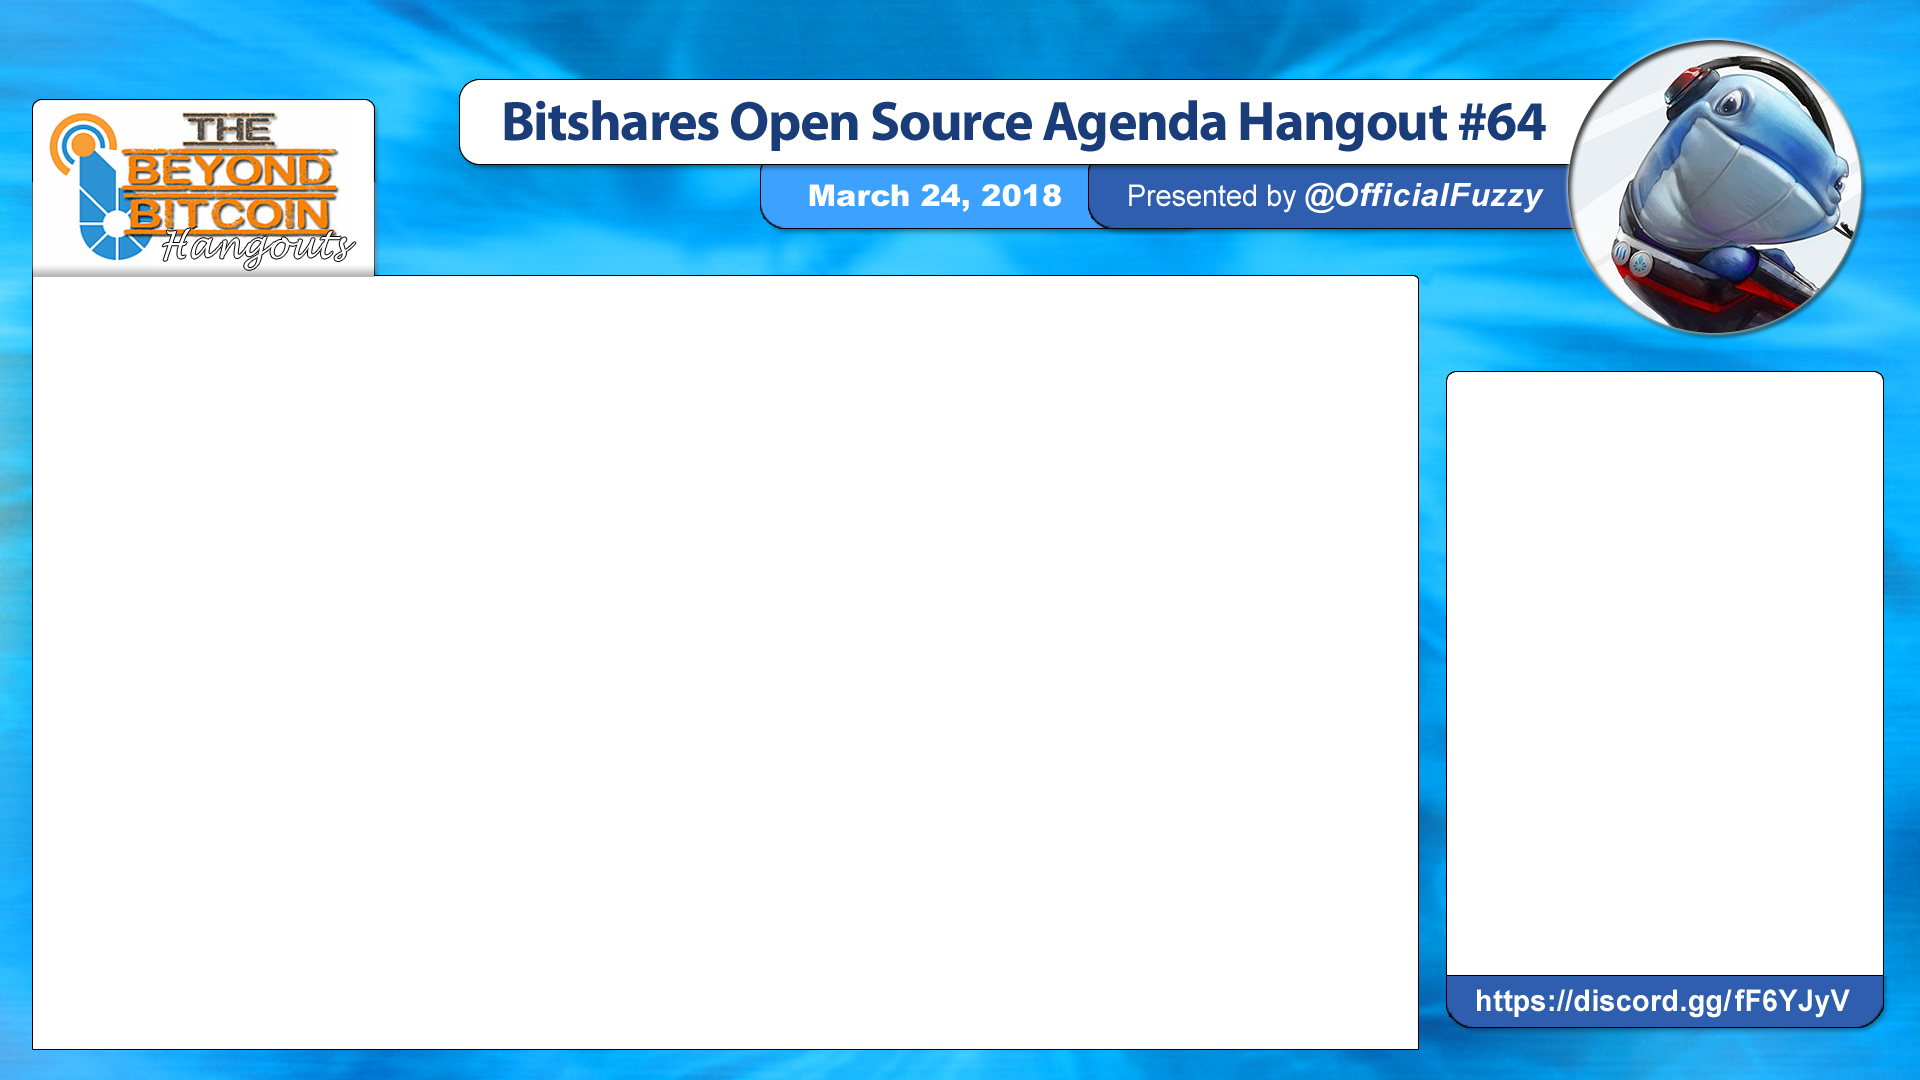 BITSHARES-STREAM-TEMPLATE-A--1920x1080--2018-03-17.png